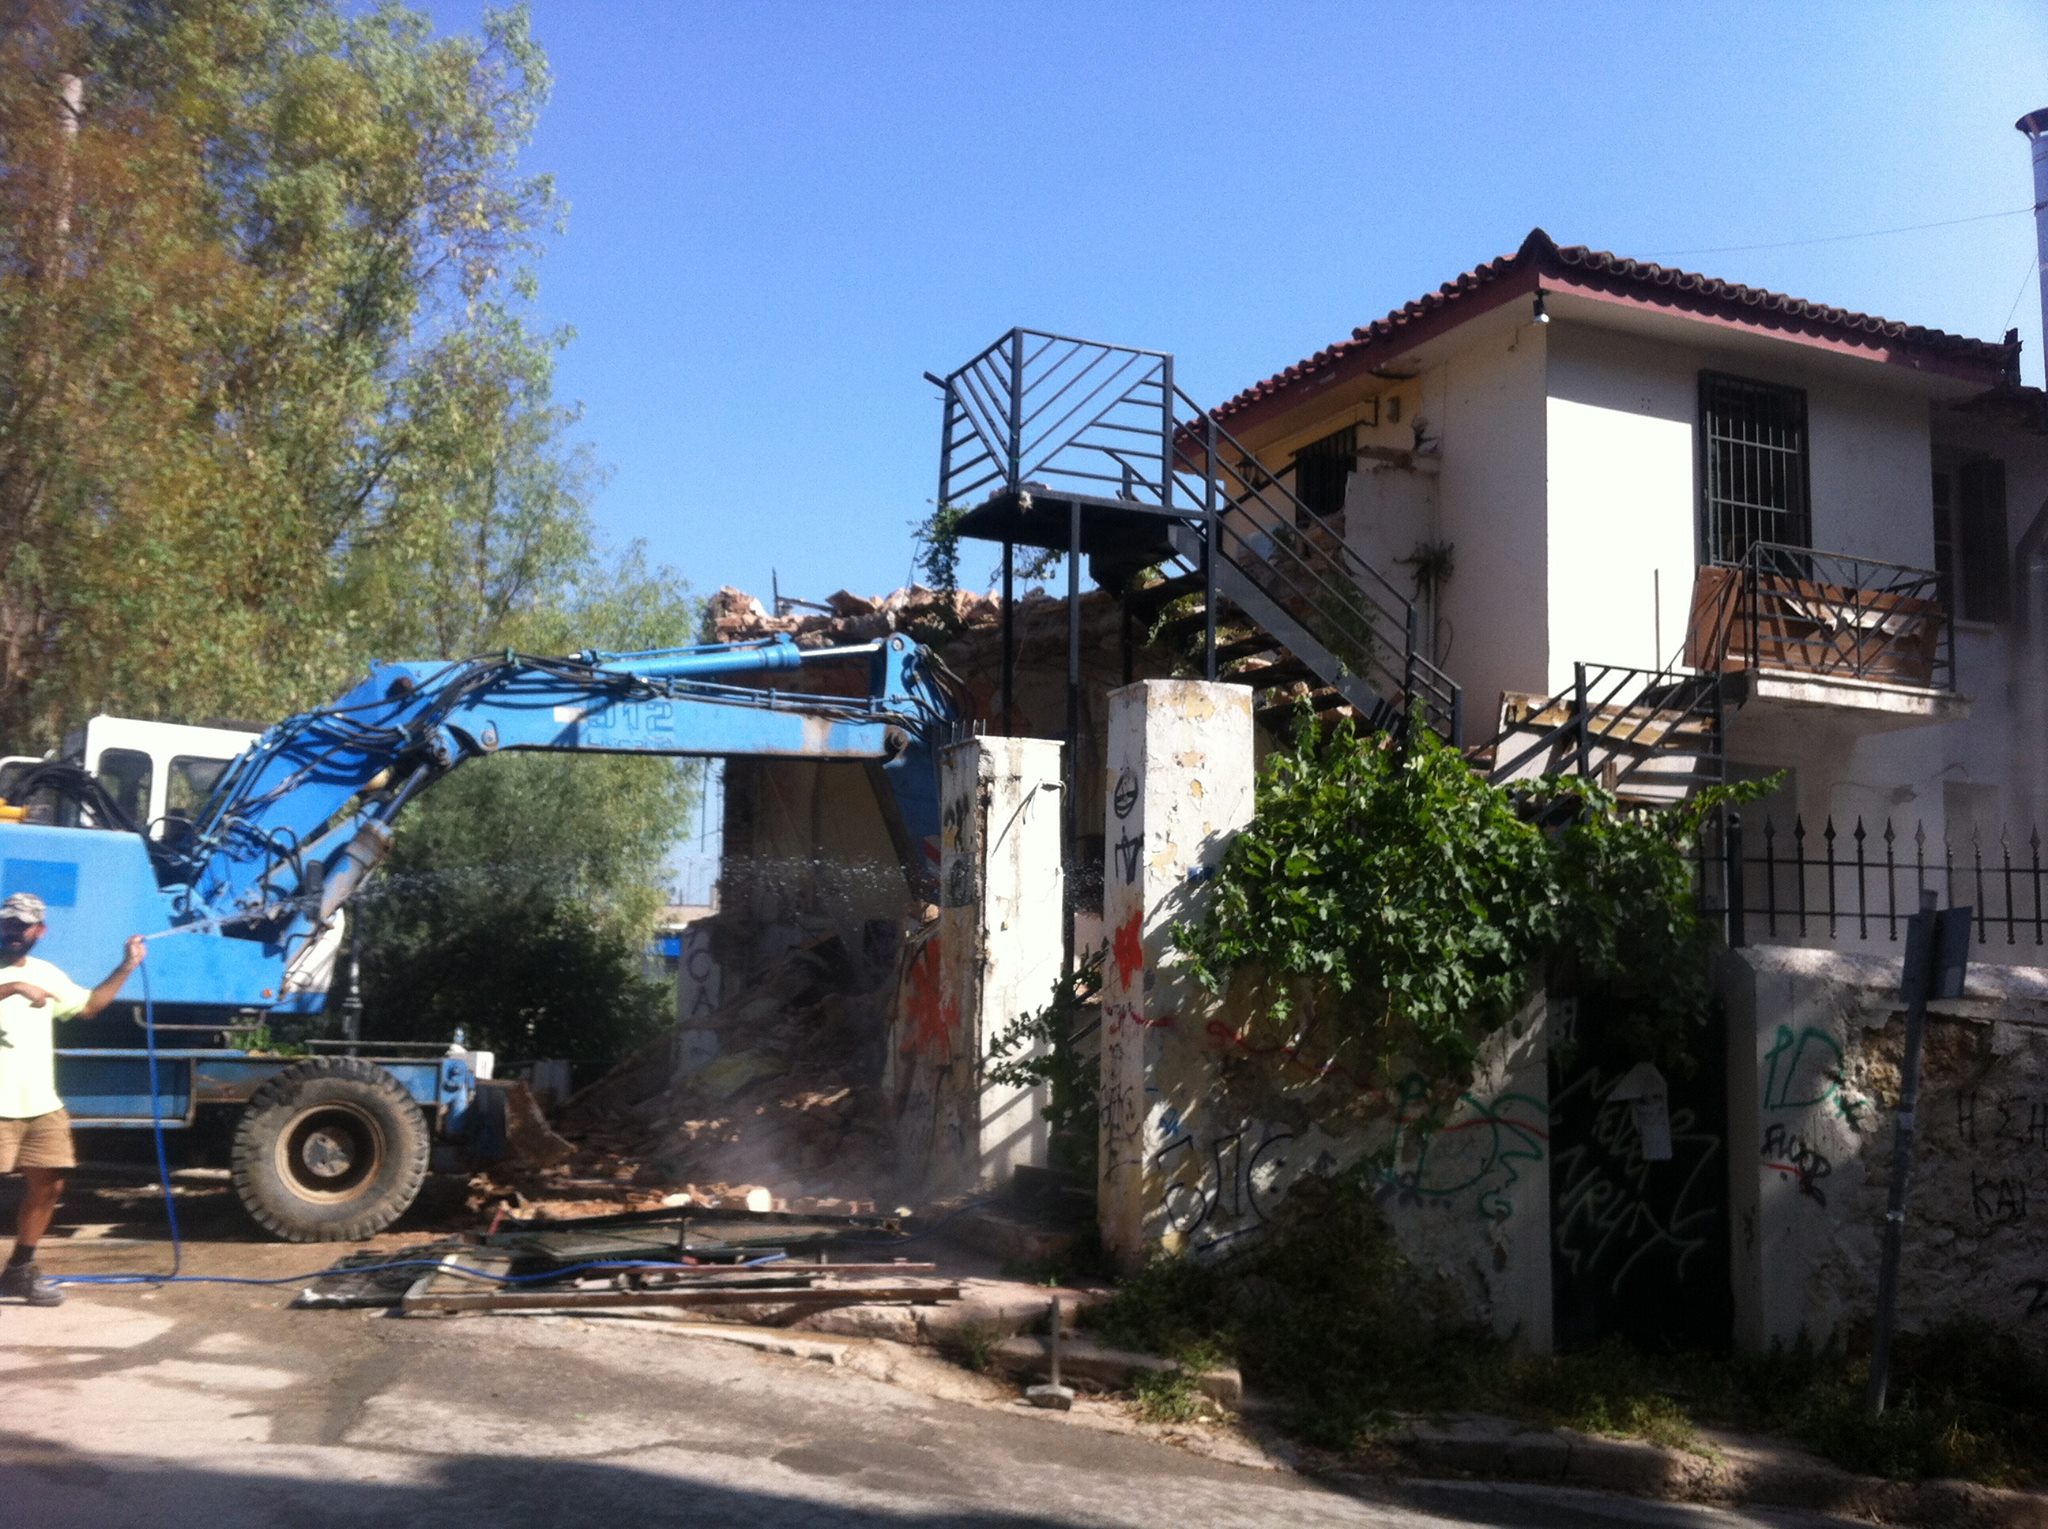 [GR] Occupied gym evicted and demolished